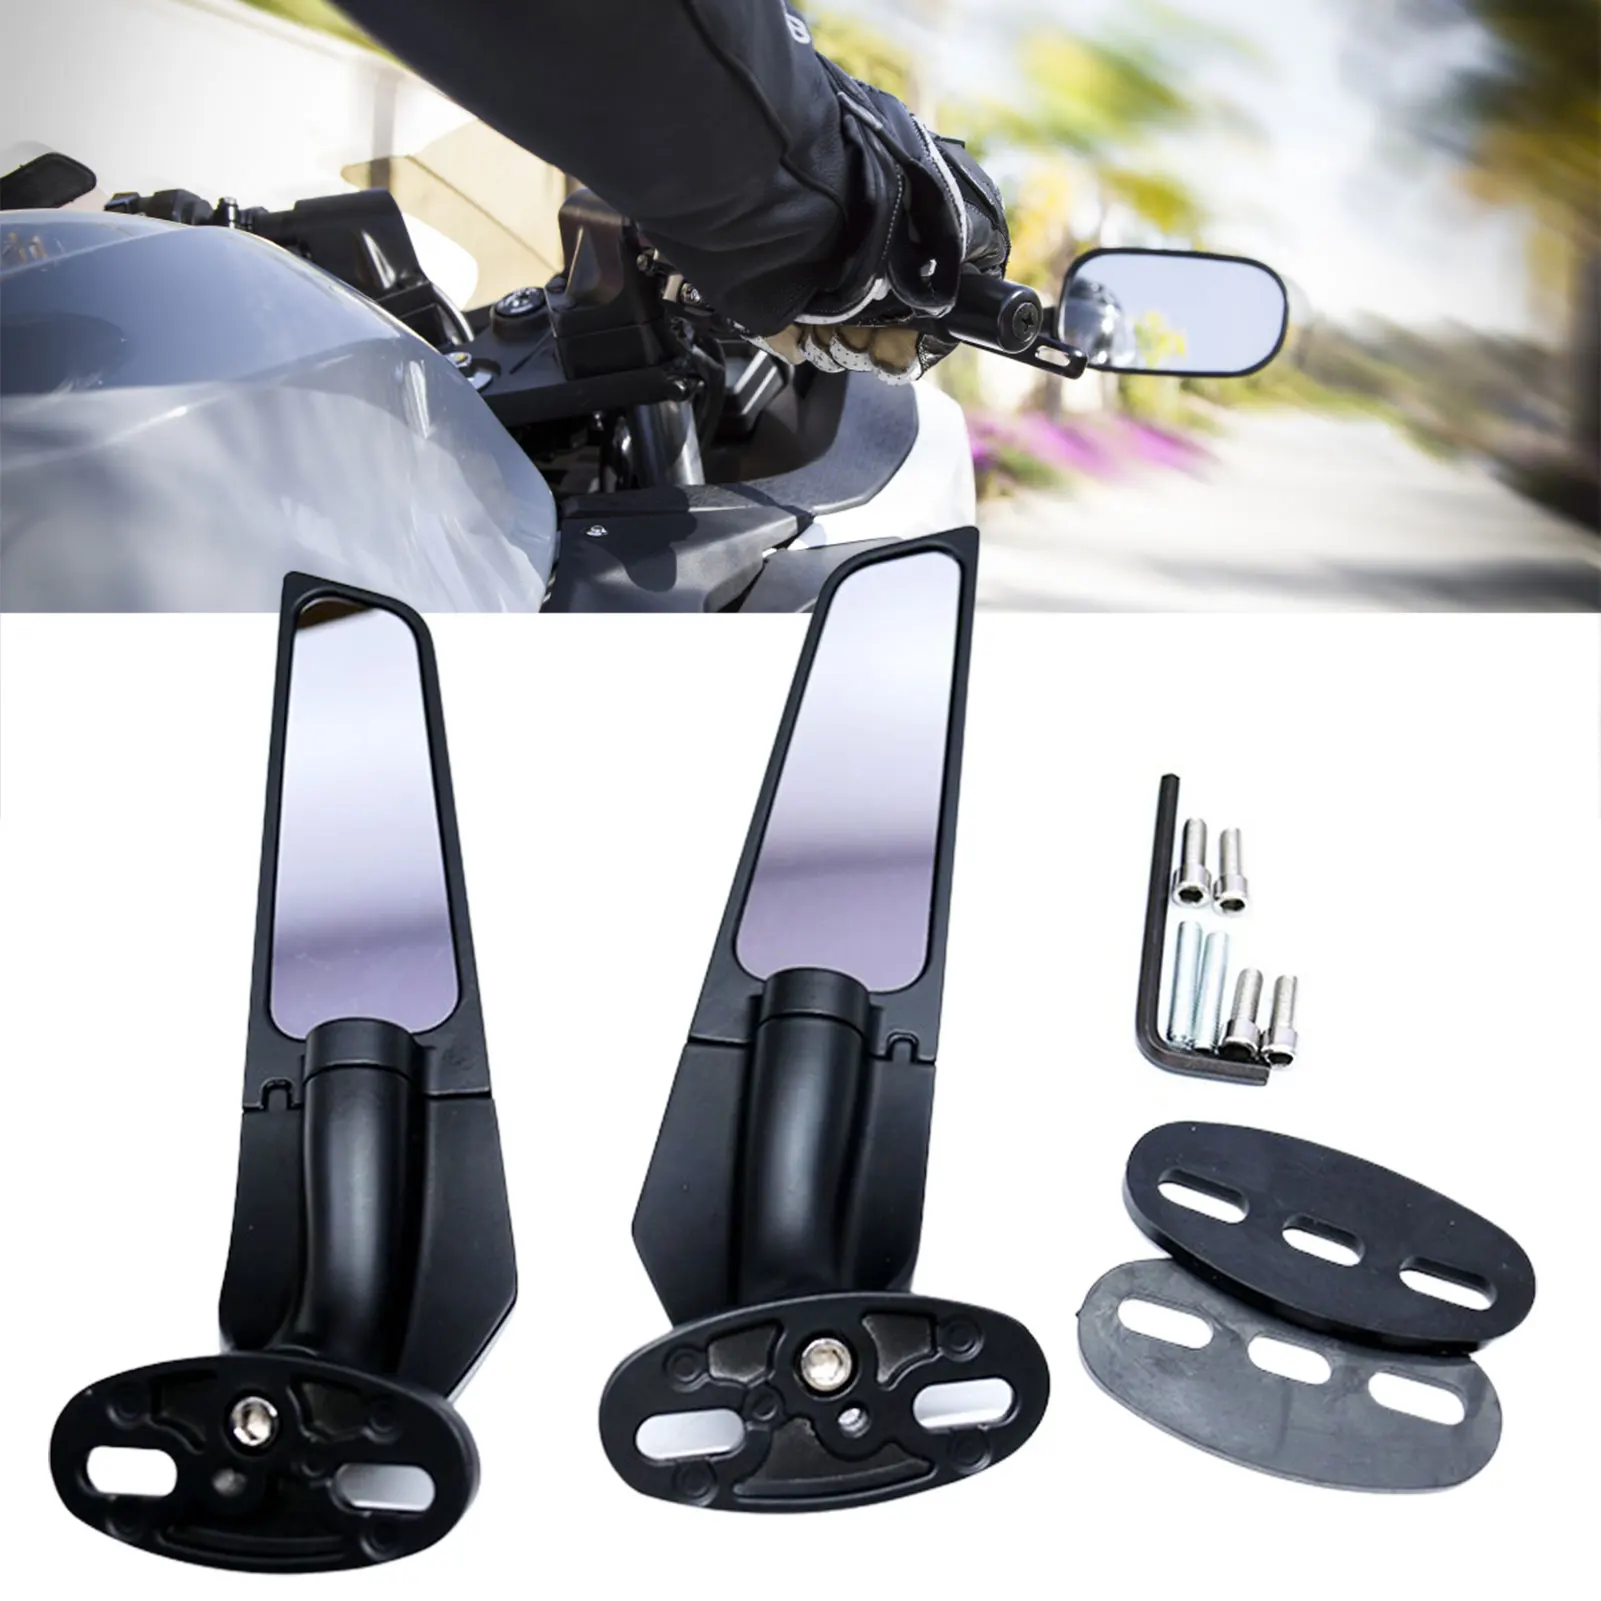 

2Pcs/Pair Adjustable Motorcycle Mirror Rearview Mirrors Back Side Motorcycle Accessories Riding Racing Customize Rearview Mirror